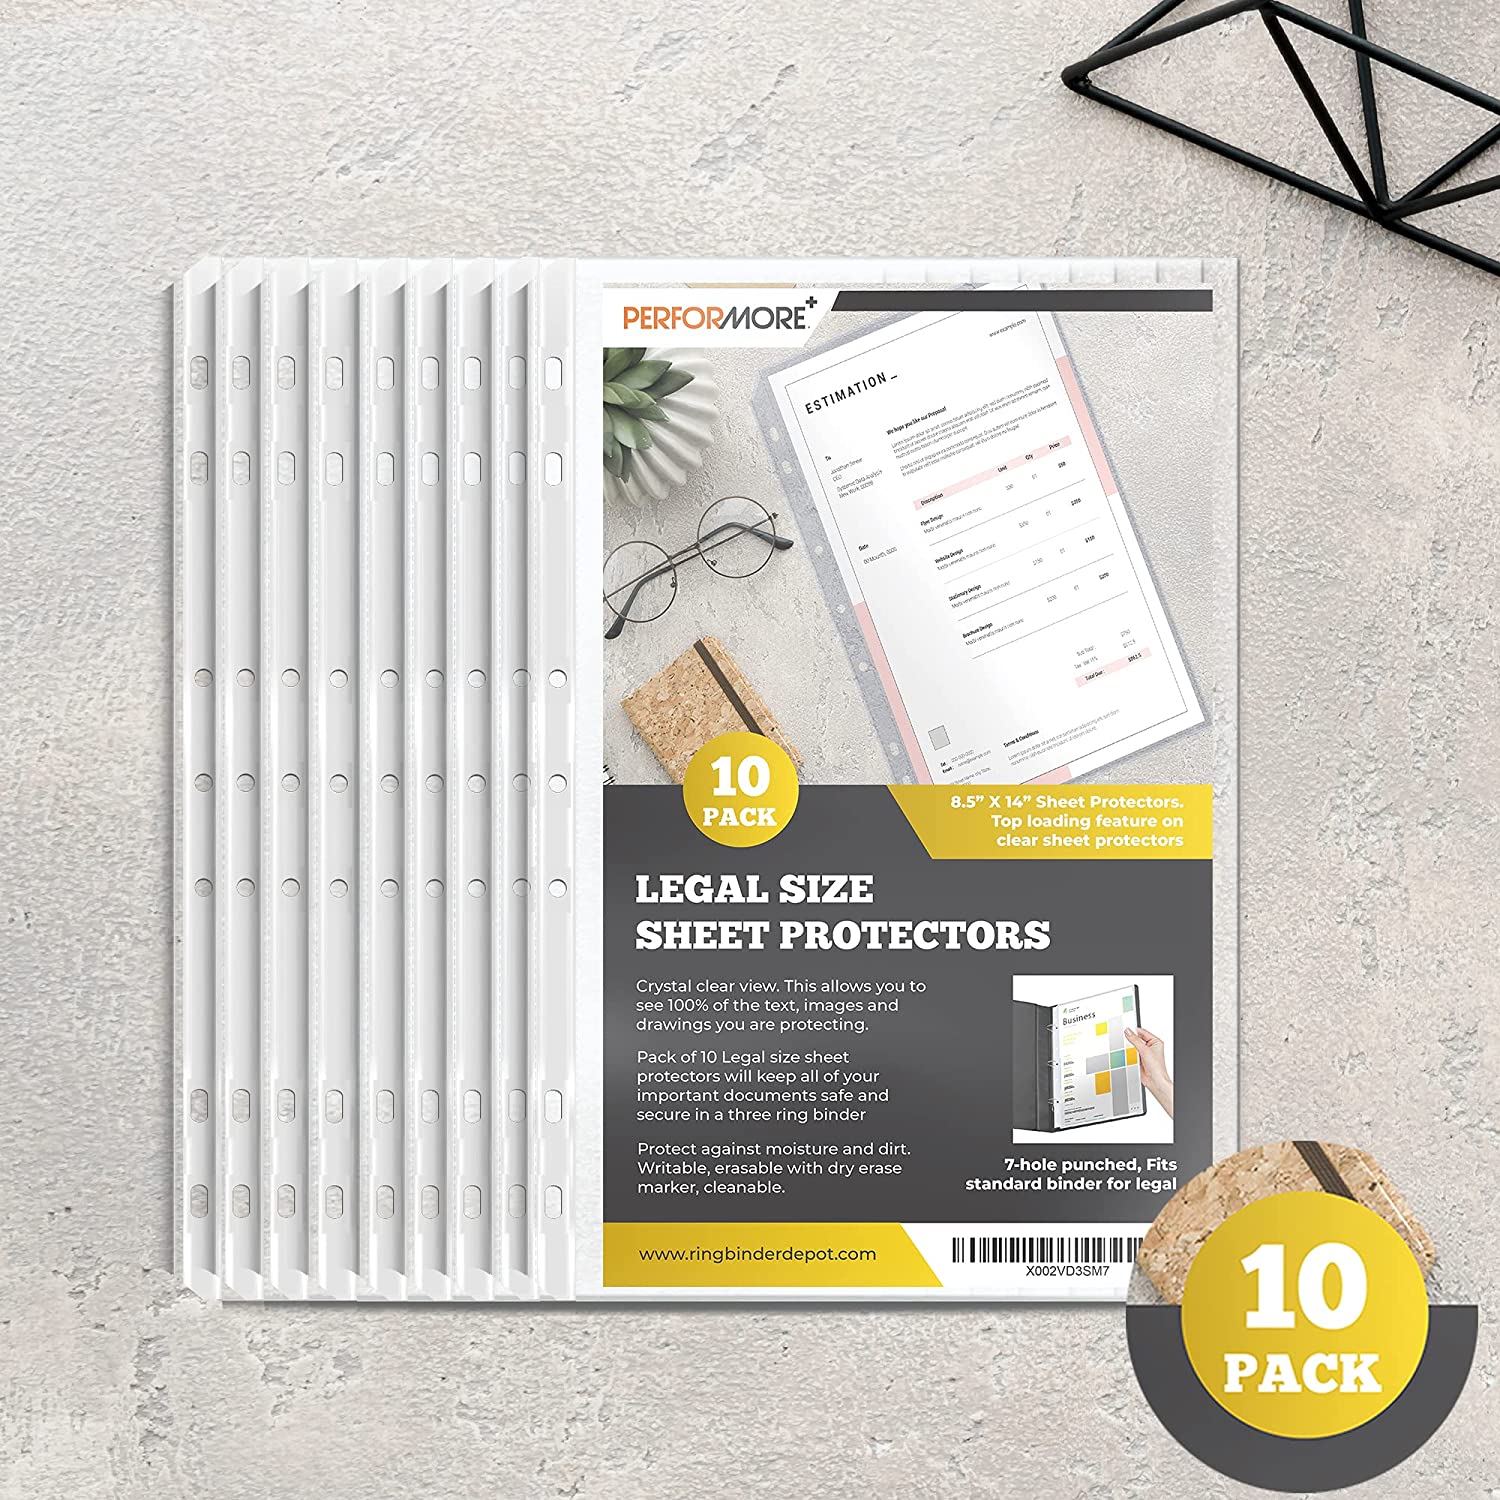 11 x 14 Sheet Protector (Pack of 25 sheets)